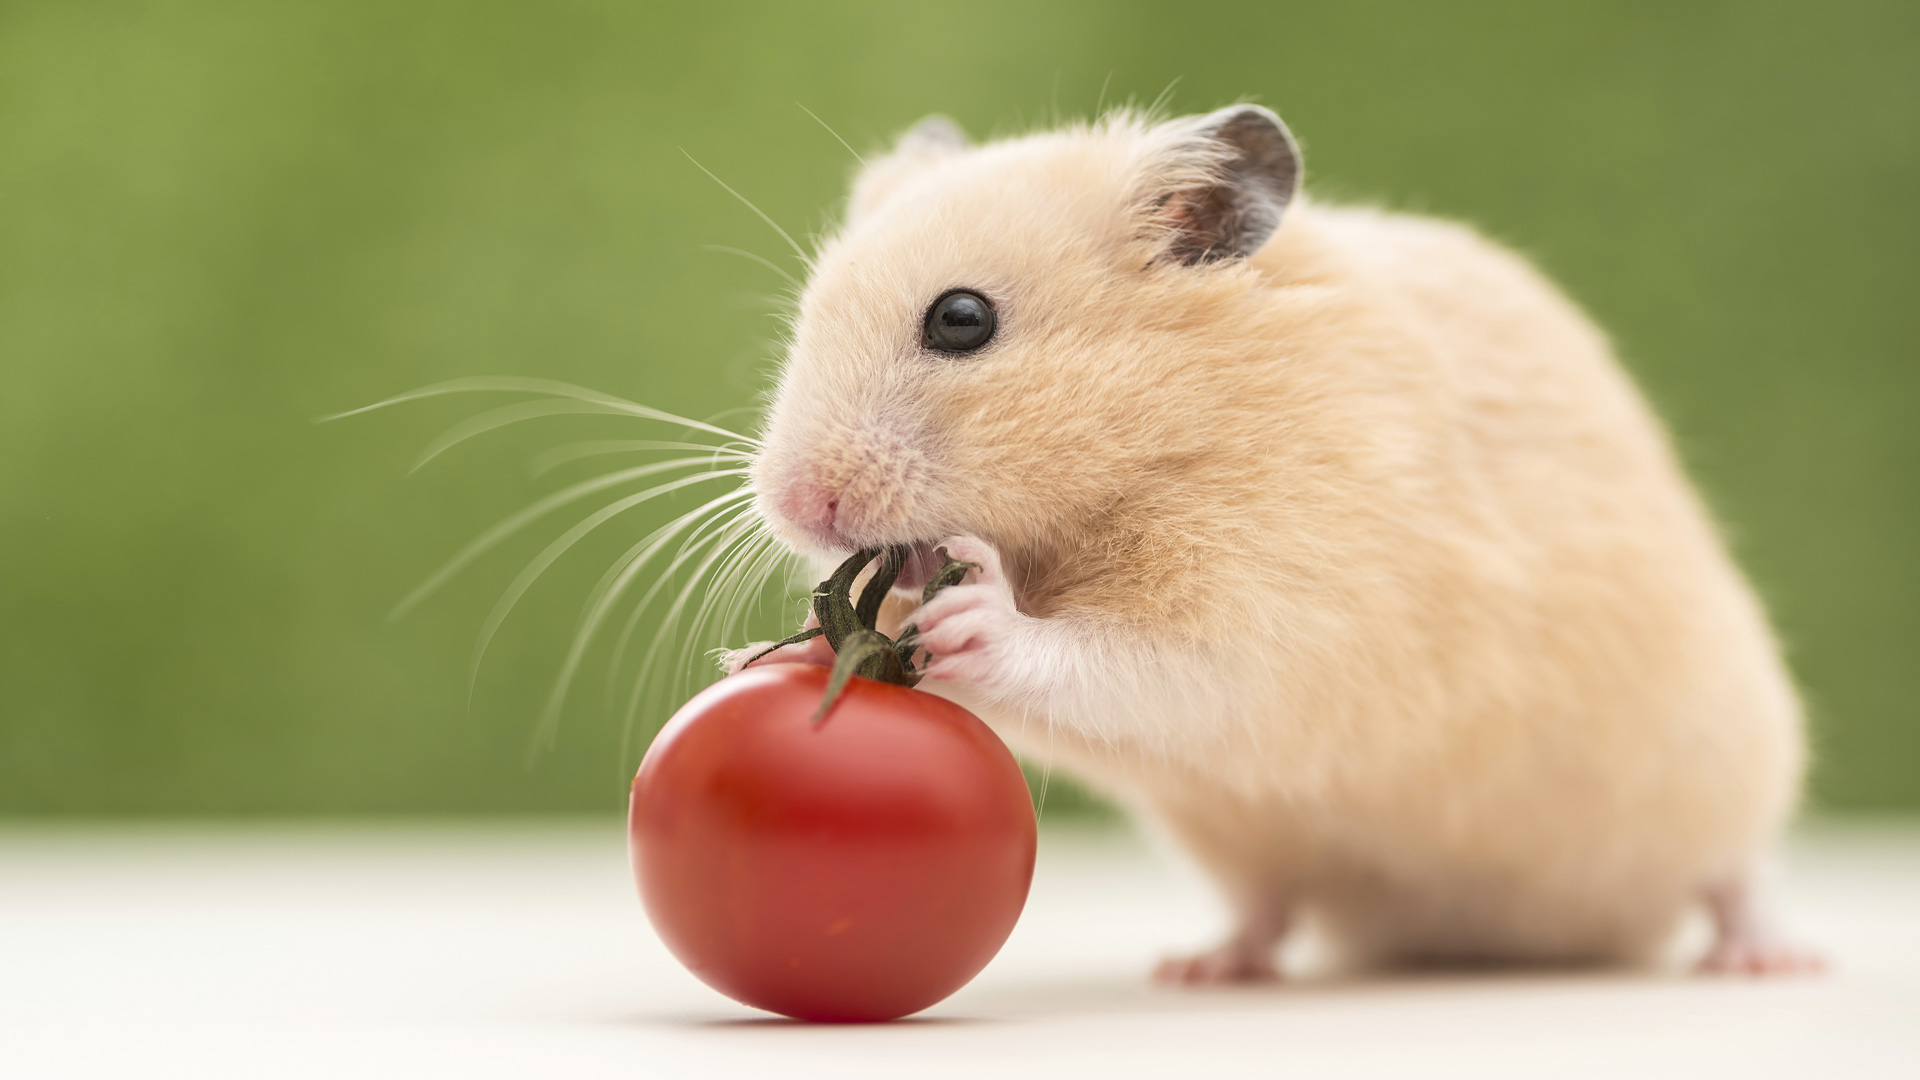 can hamsters eat tomato sauce